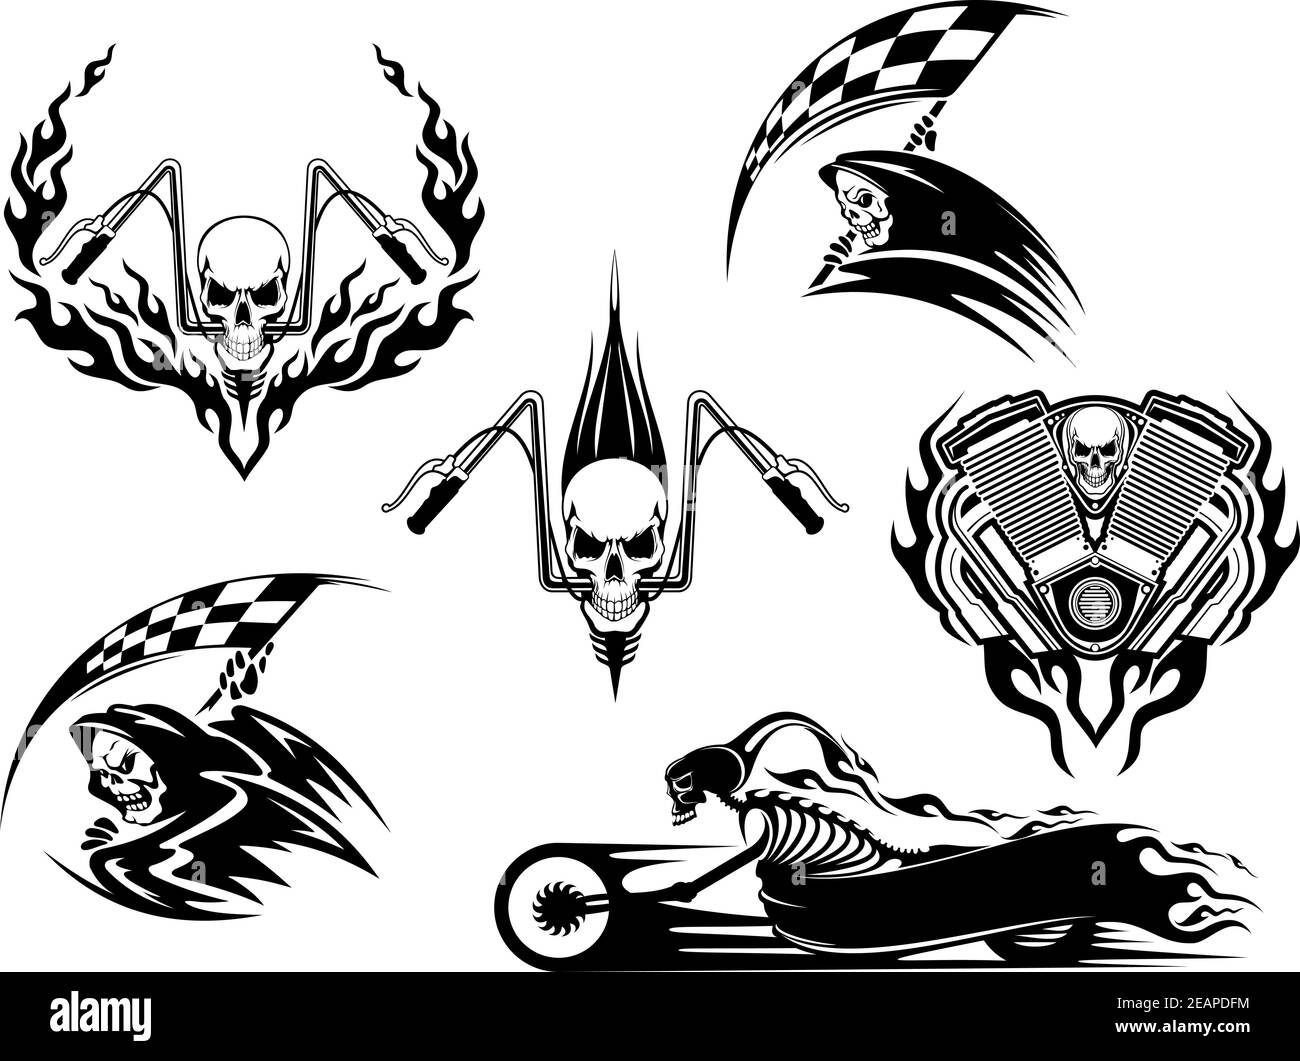 Set of motor racing skulls in black and white designs with a grim reaper holding a checkered flag, racing skull on handlebars and skeleton on a speedi Stock Vector